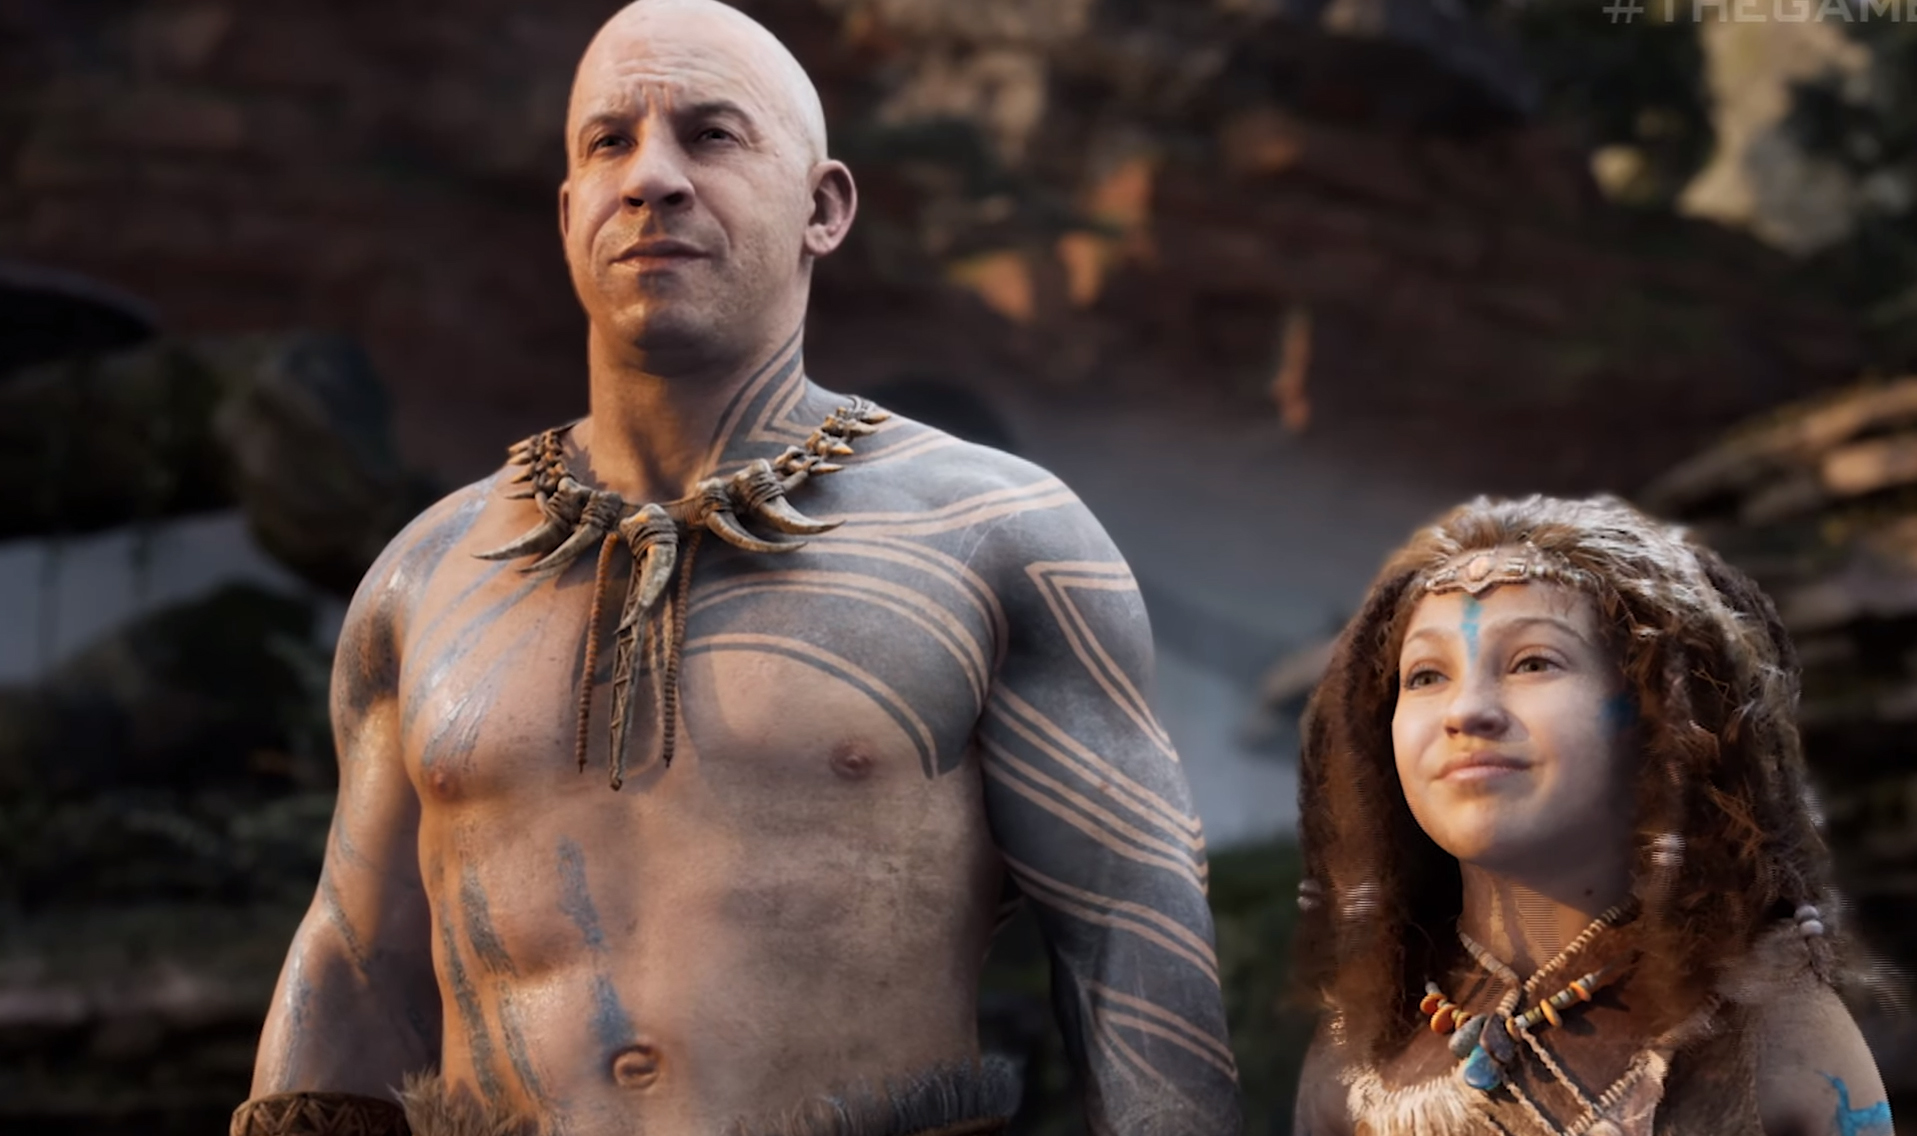 Ark 2 stars Vin Diesel: Here are the facts and latest news on the